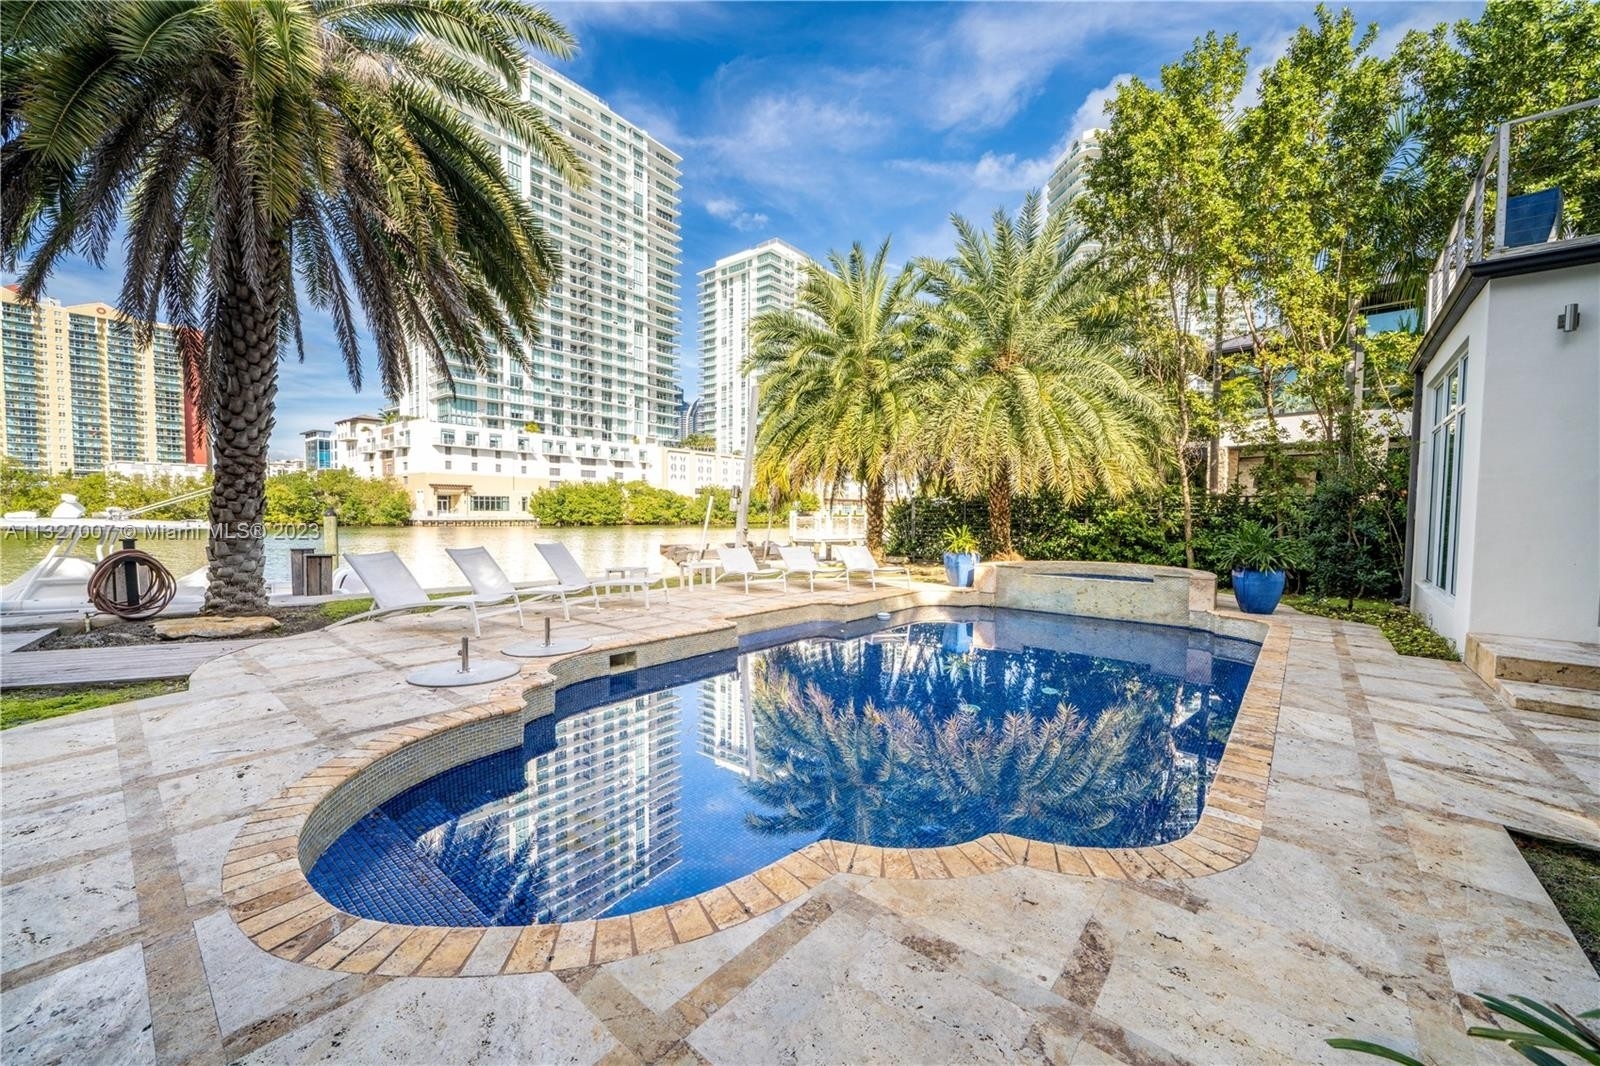 Single Family Home for Sale at Sunny Isles Beach, FL 33160